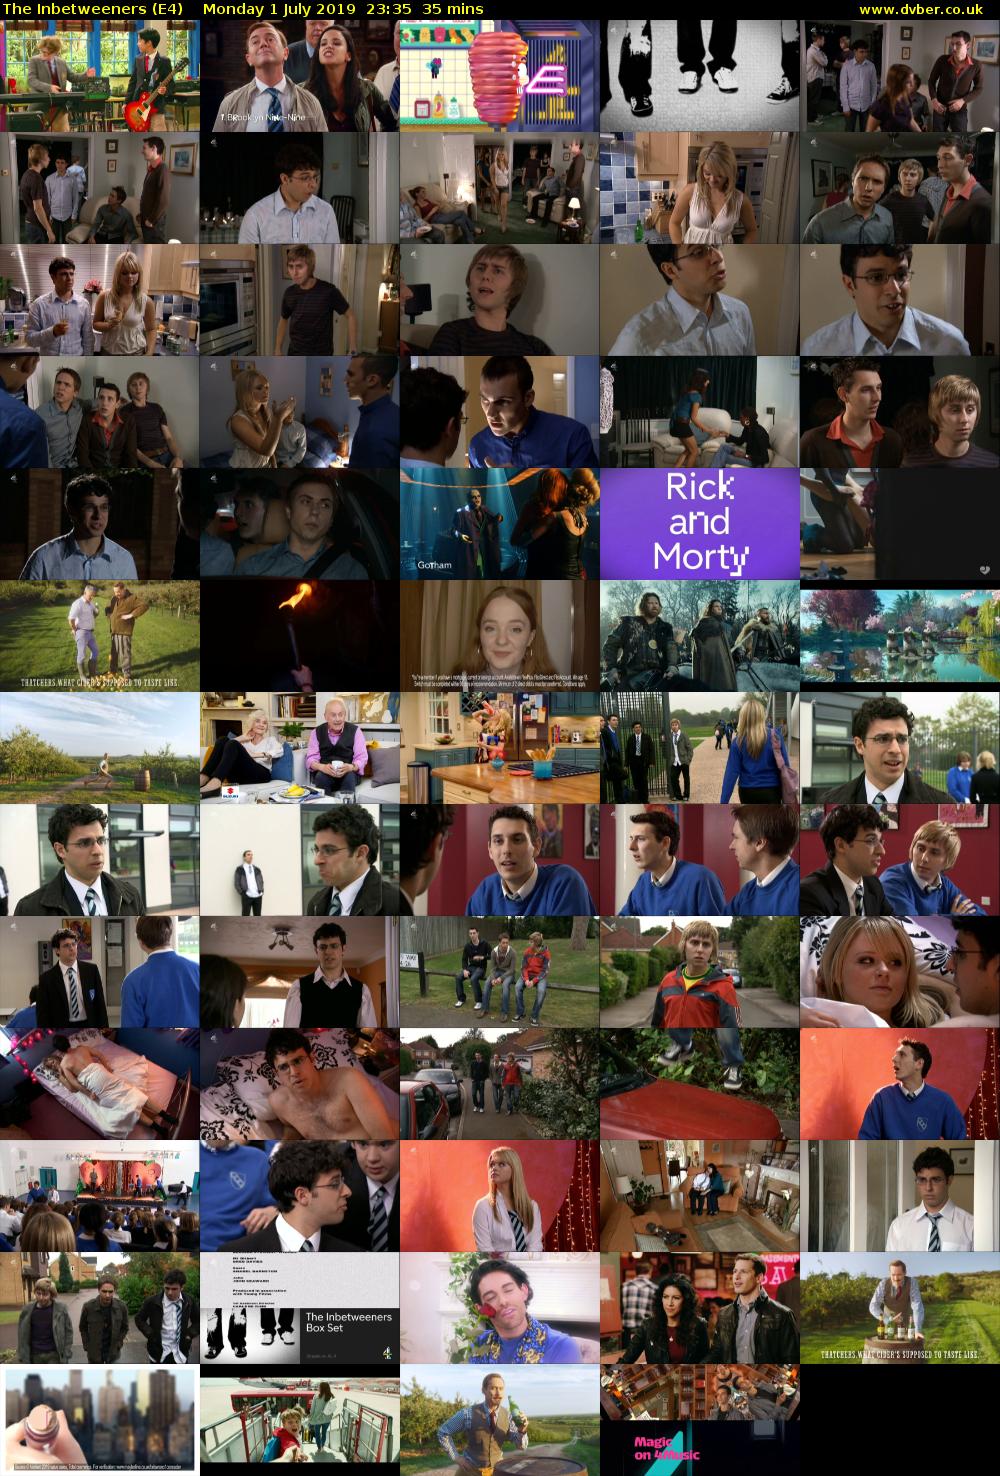 The Inbetweeners (E4) Monday 1 July 2019 23:35 - 00:10